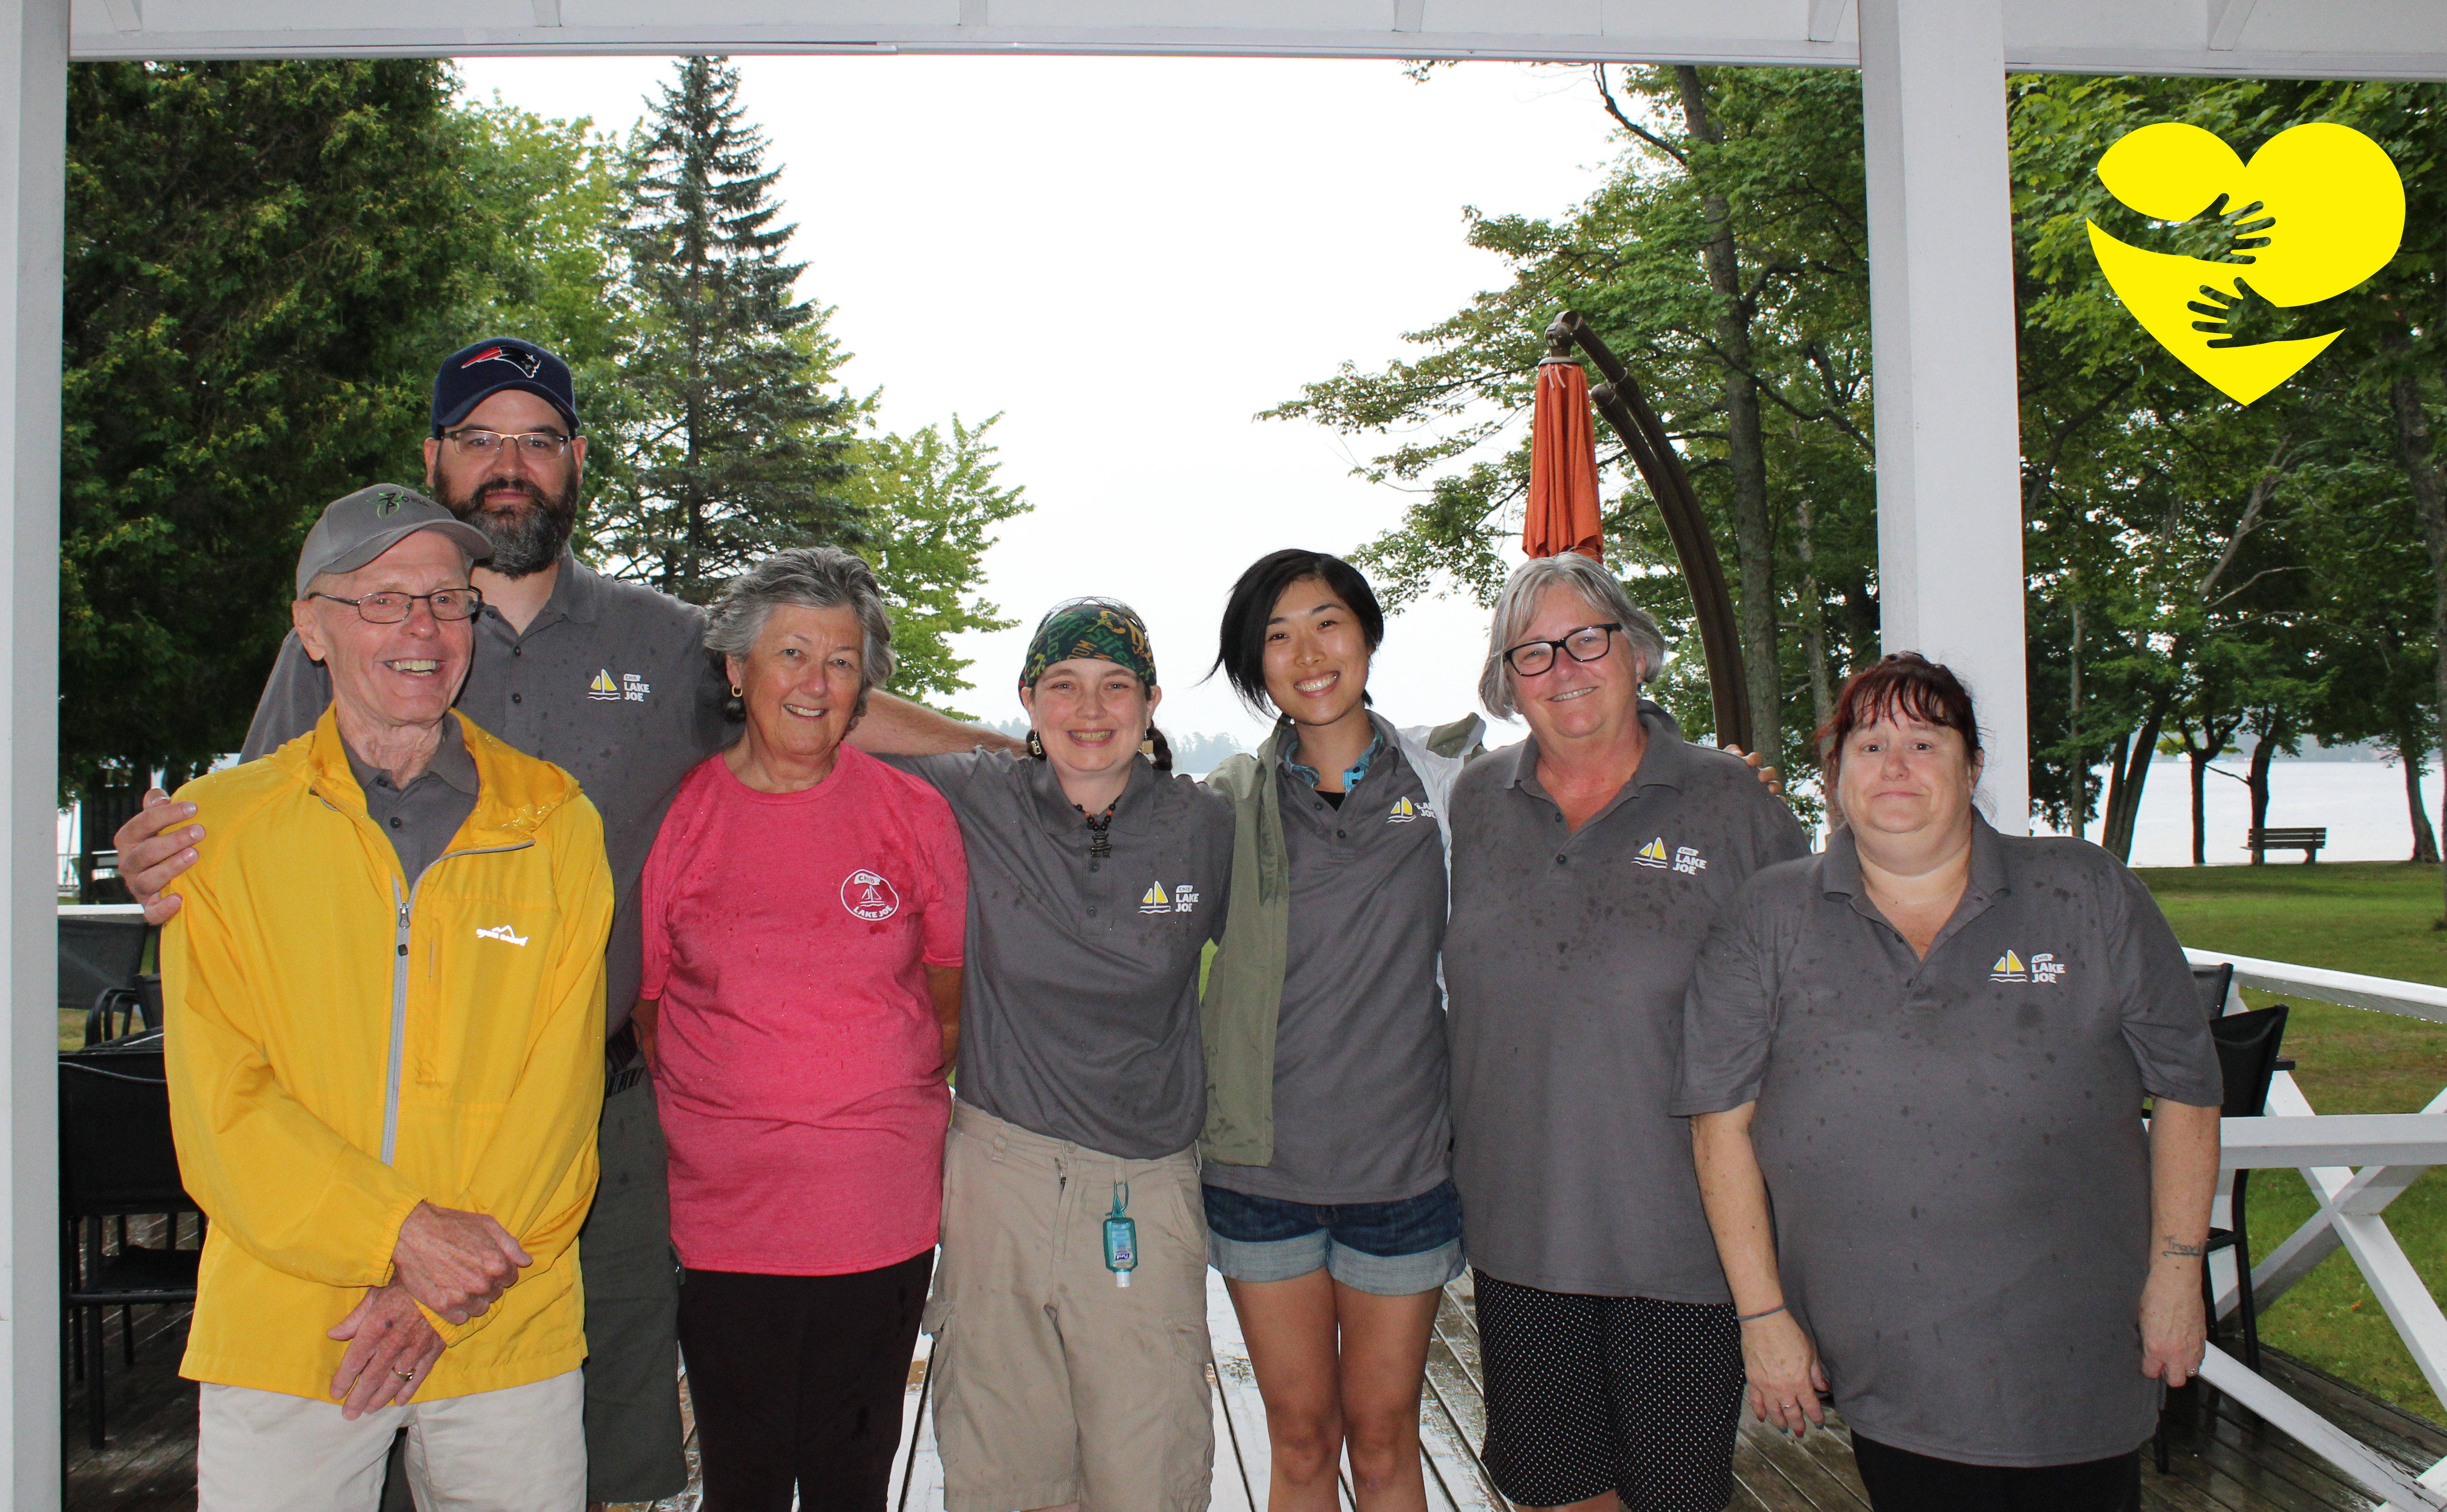 Sandra, wearing a pink shirt, smiling for the camera in a group photo with other CNIB Lake Joe volunteers. A graphic of arms hugging a cartoon yellow heart can be seen in the top-right corner of the photo.